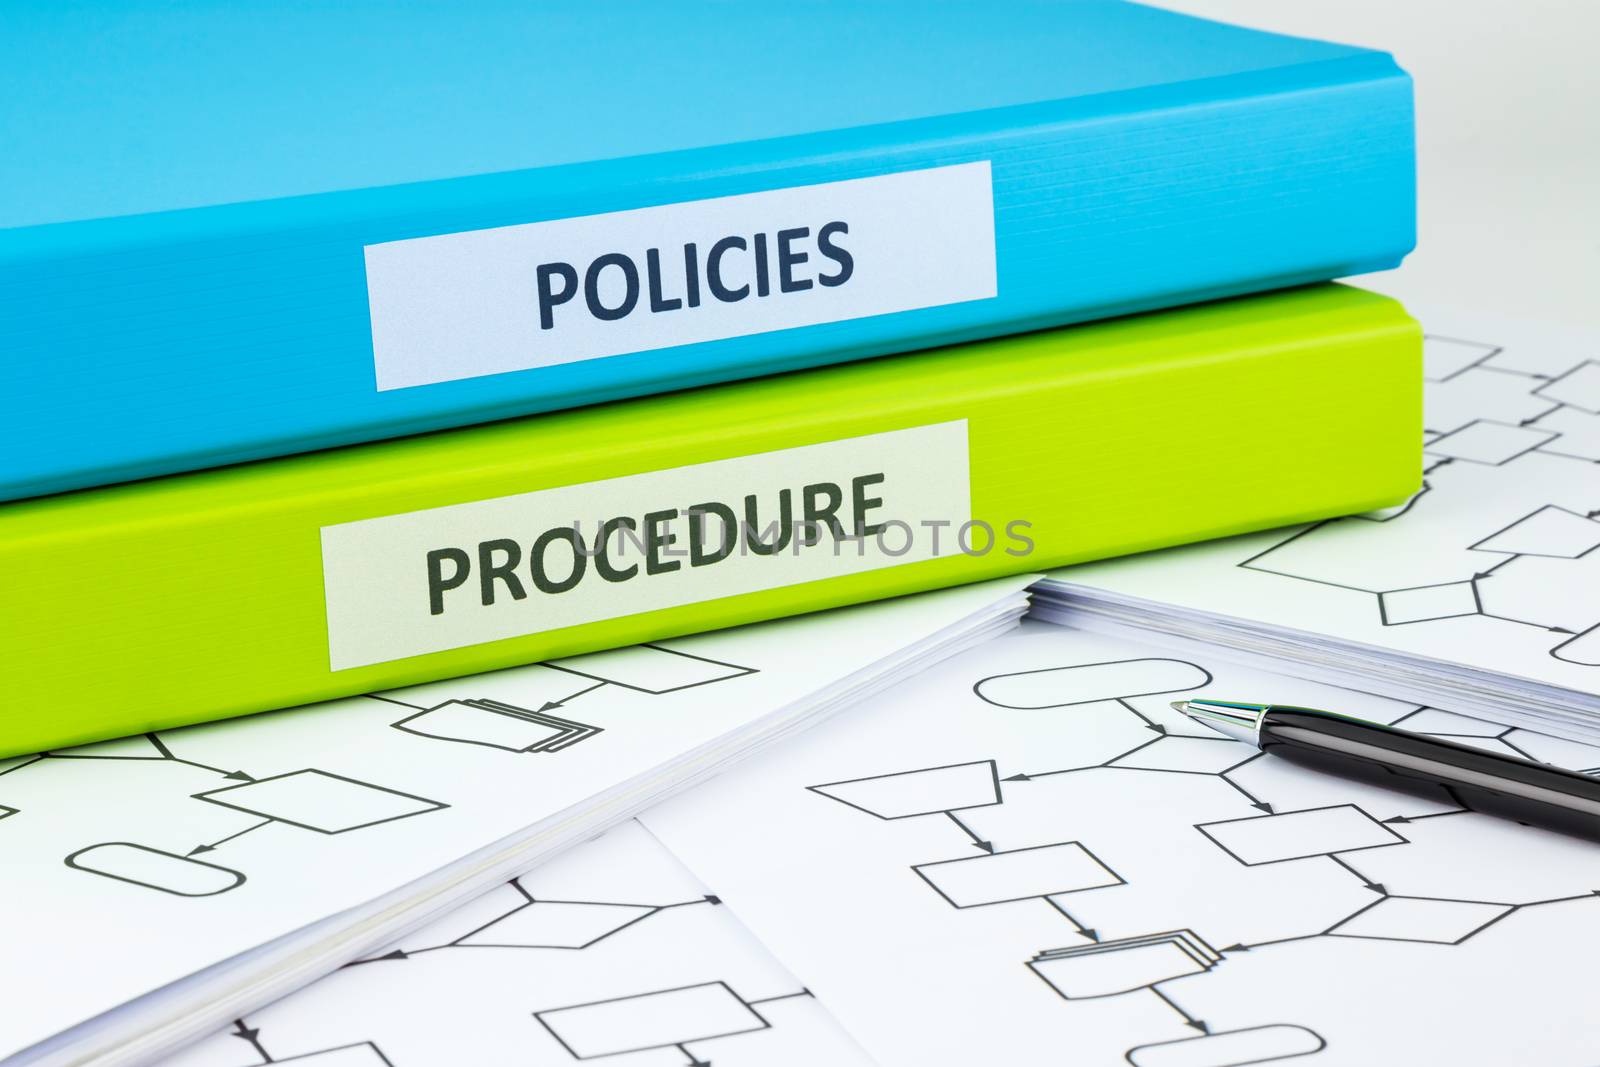 Company policies and procedures  by vinnstock